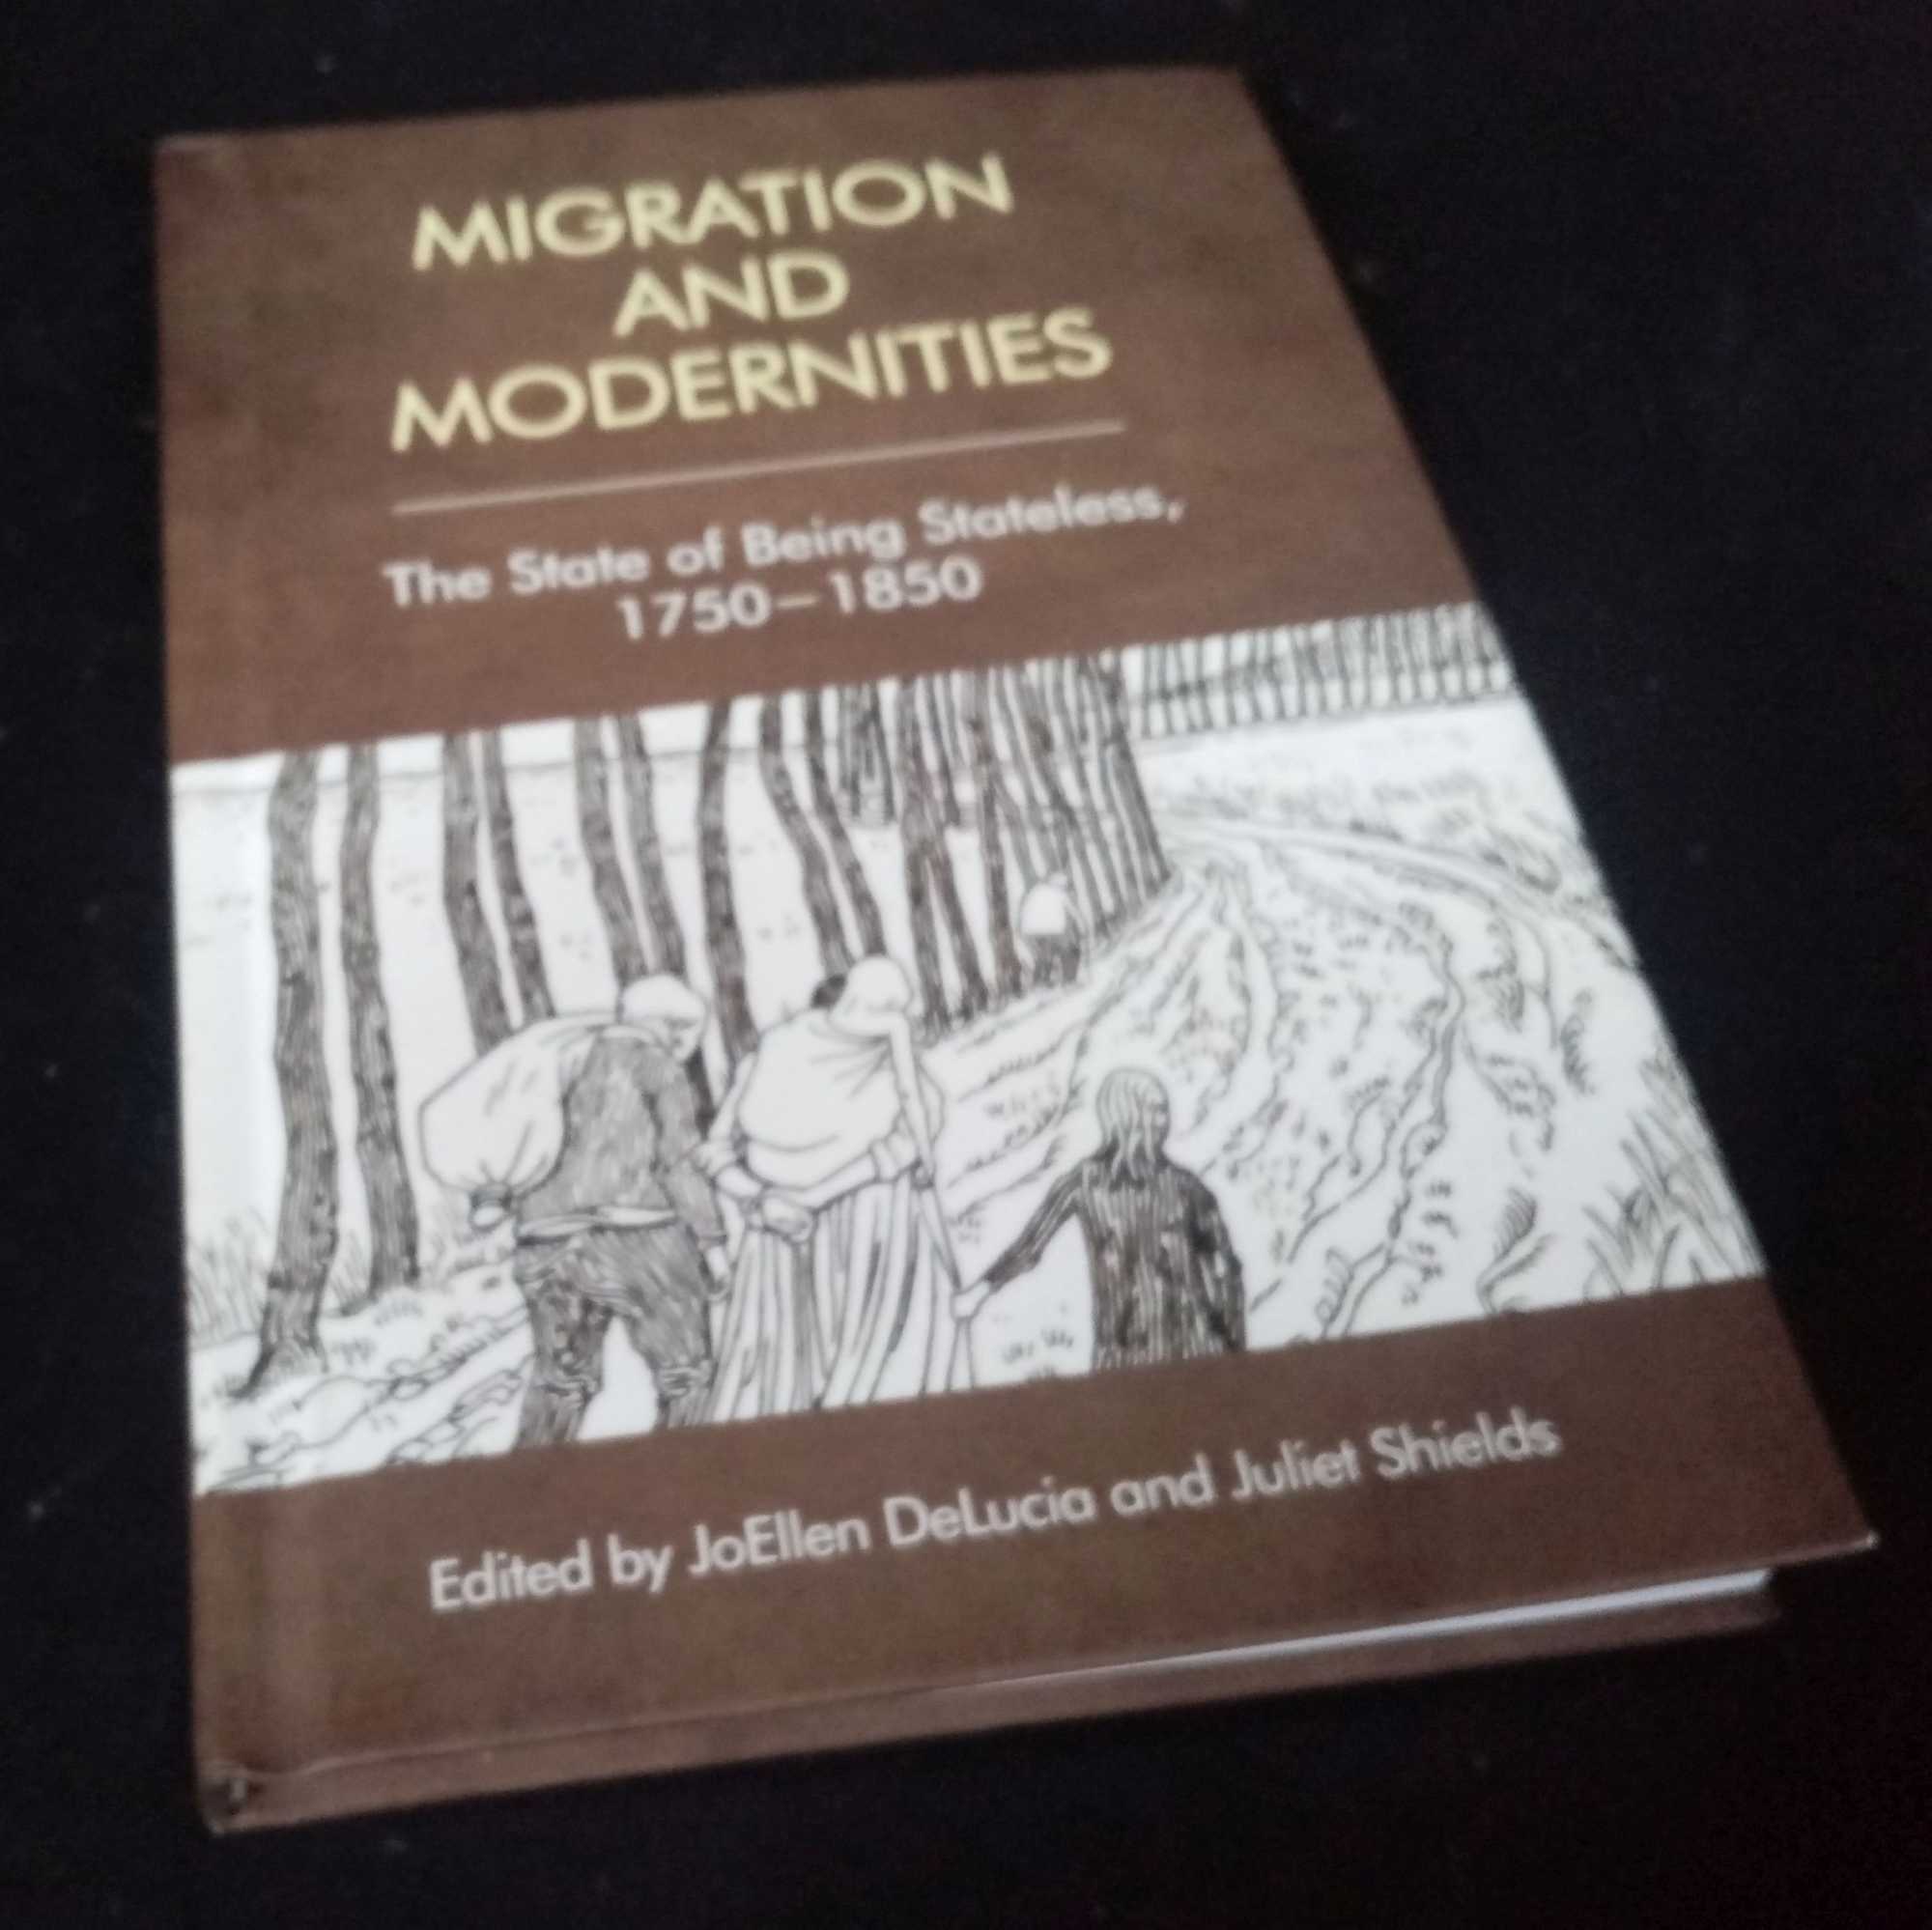 JoEllen DeLucia, ed - Migration and Modernities: The State of Being Stateless, 1750-1850